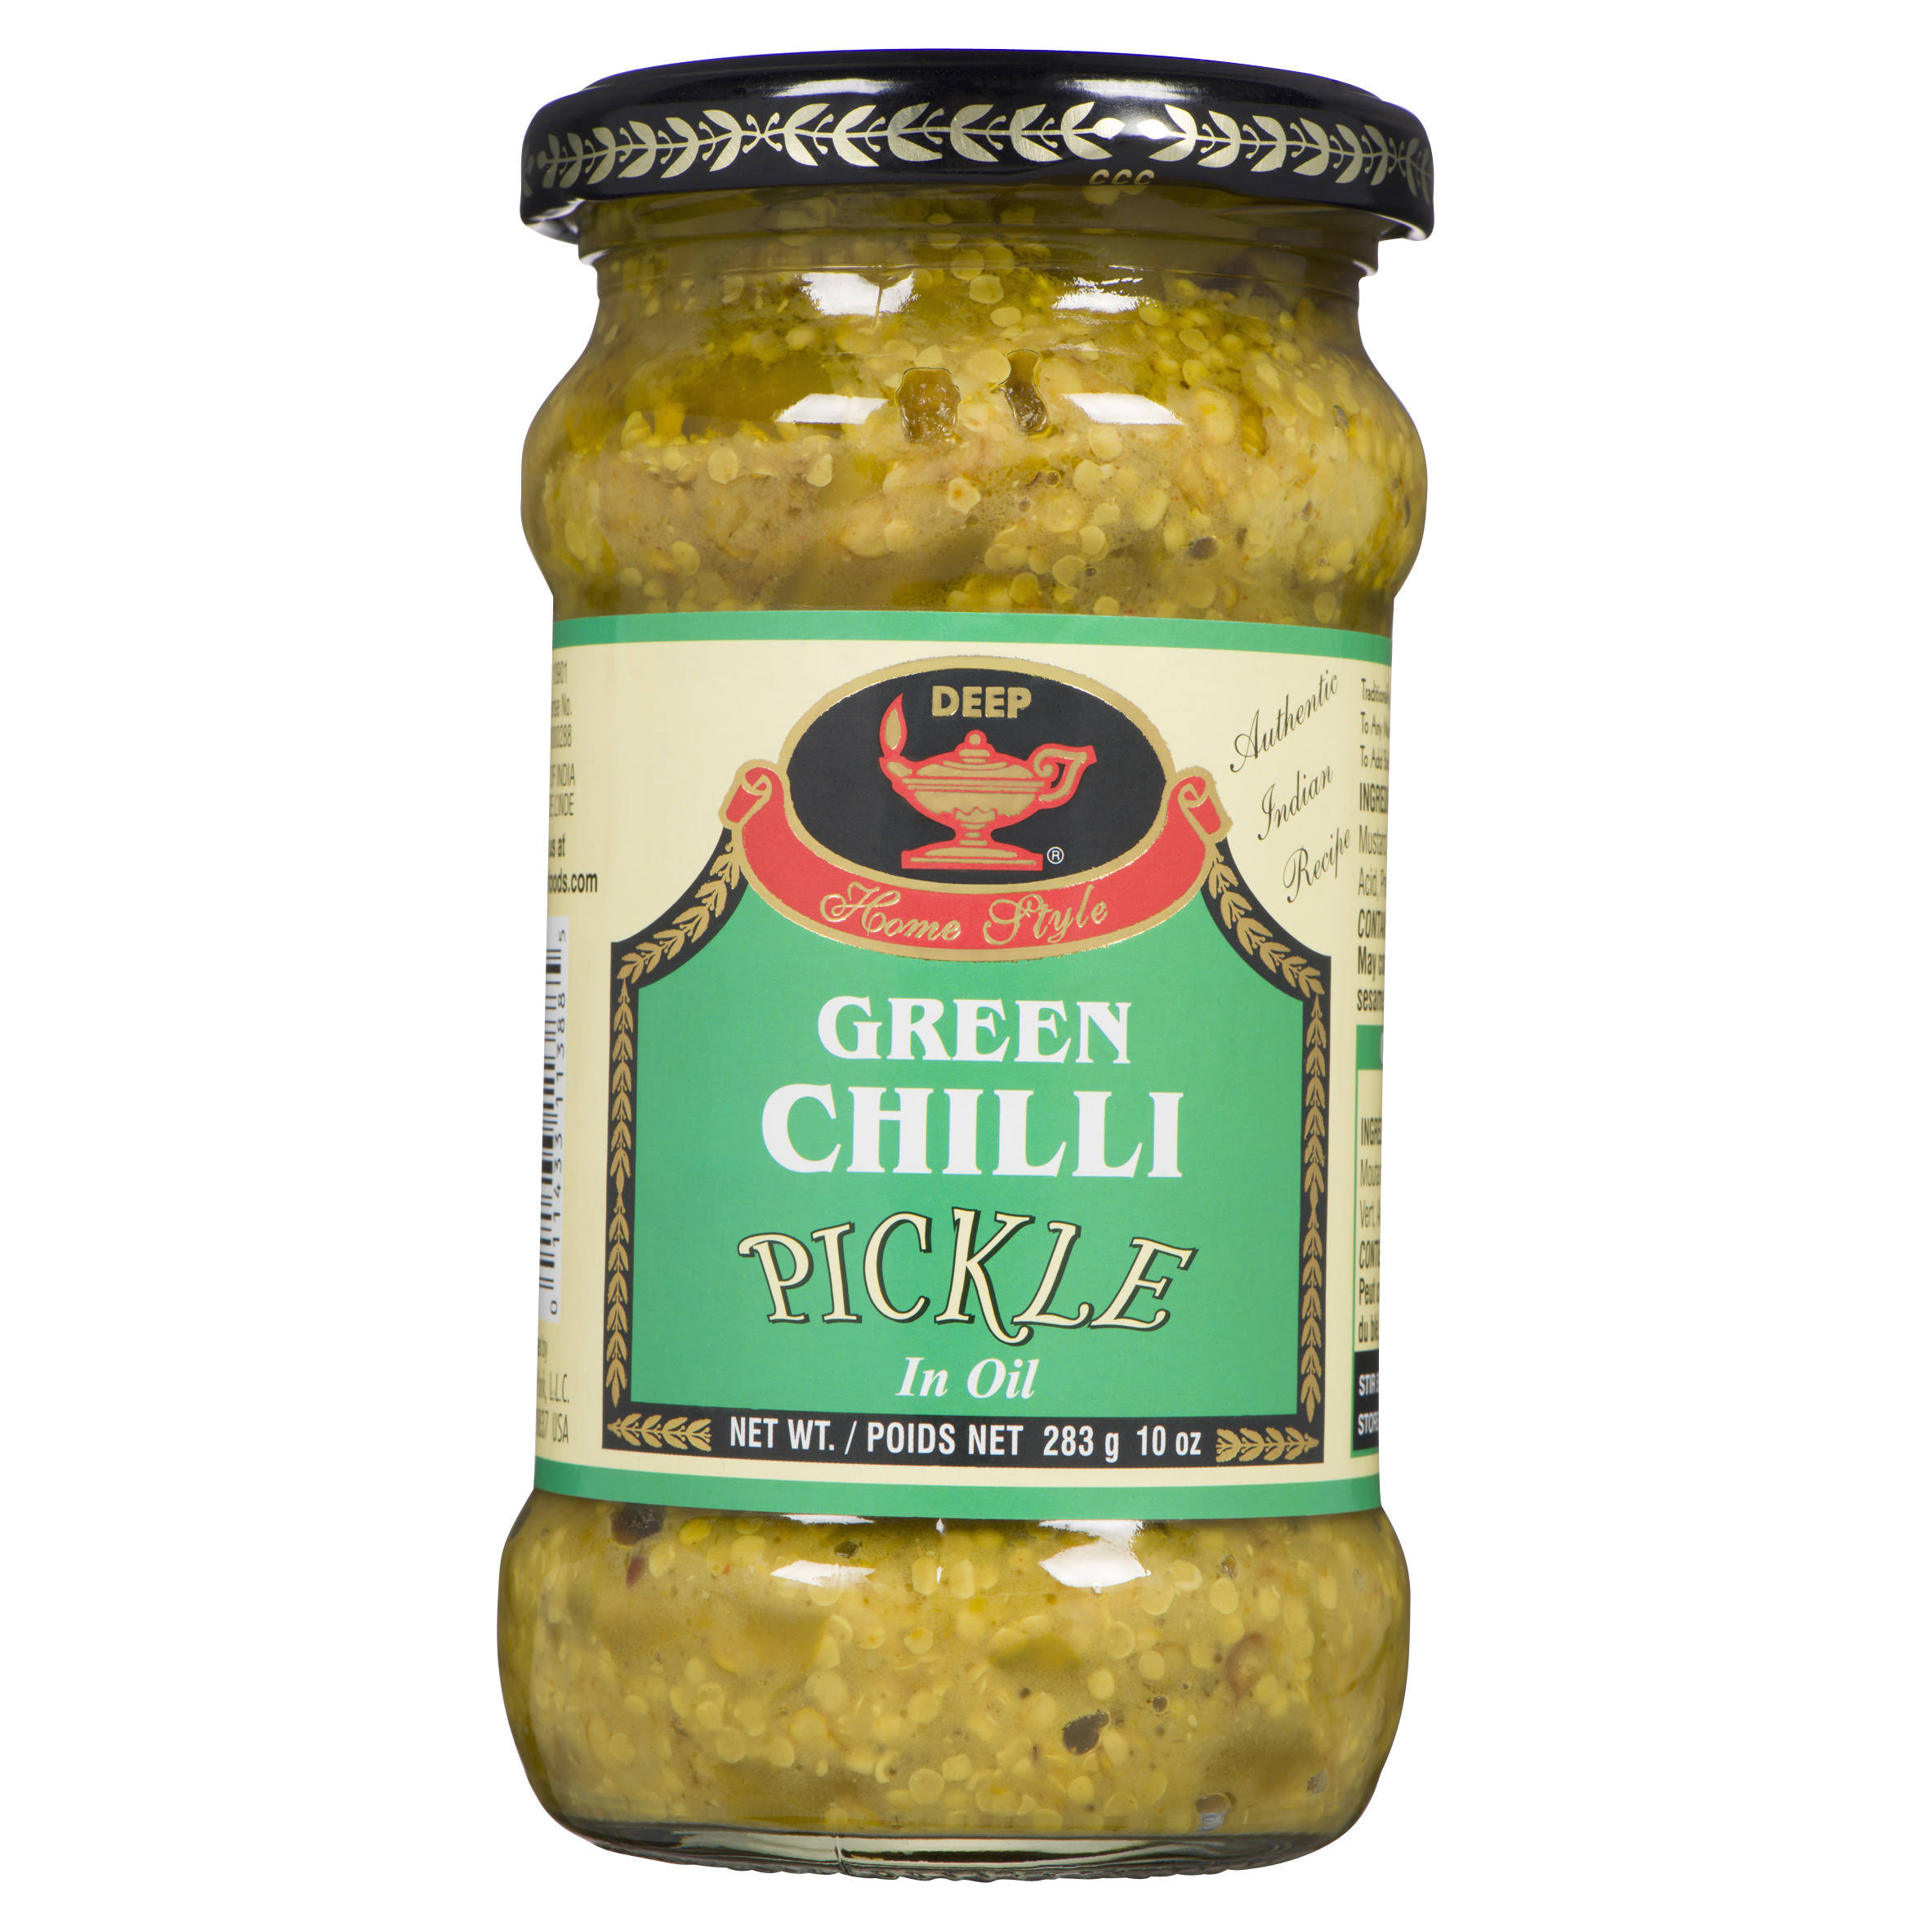 Deep Home Style Green Chili Pickle - 10oz